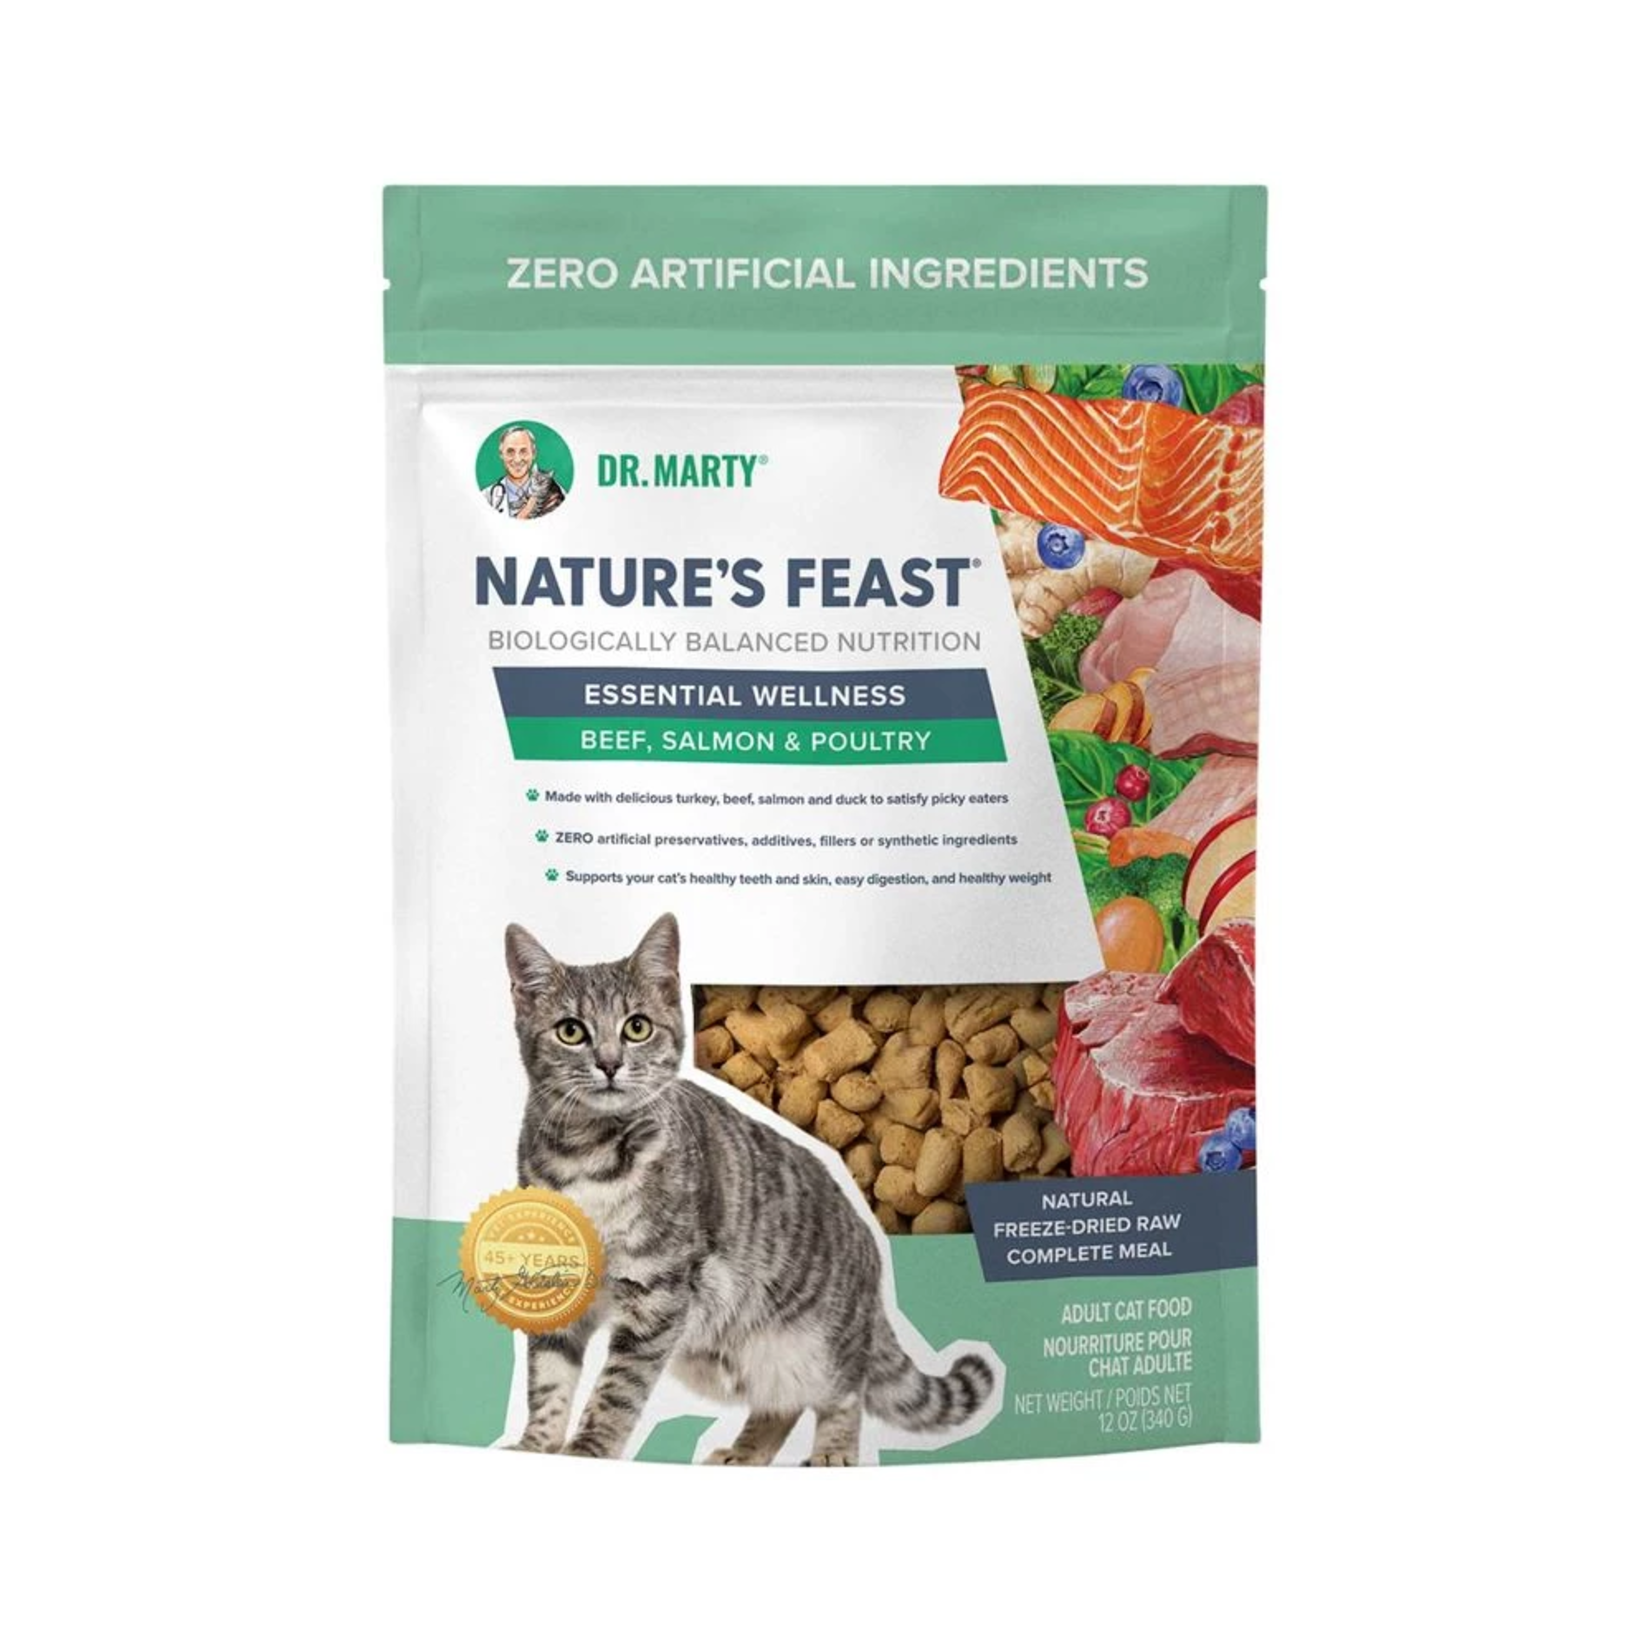 Dr. Marty Dr. Marty Nature's Blend - Freeze-Dried Raw Essential Wellness Beef, Salmon & Poultry Cat Food